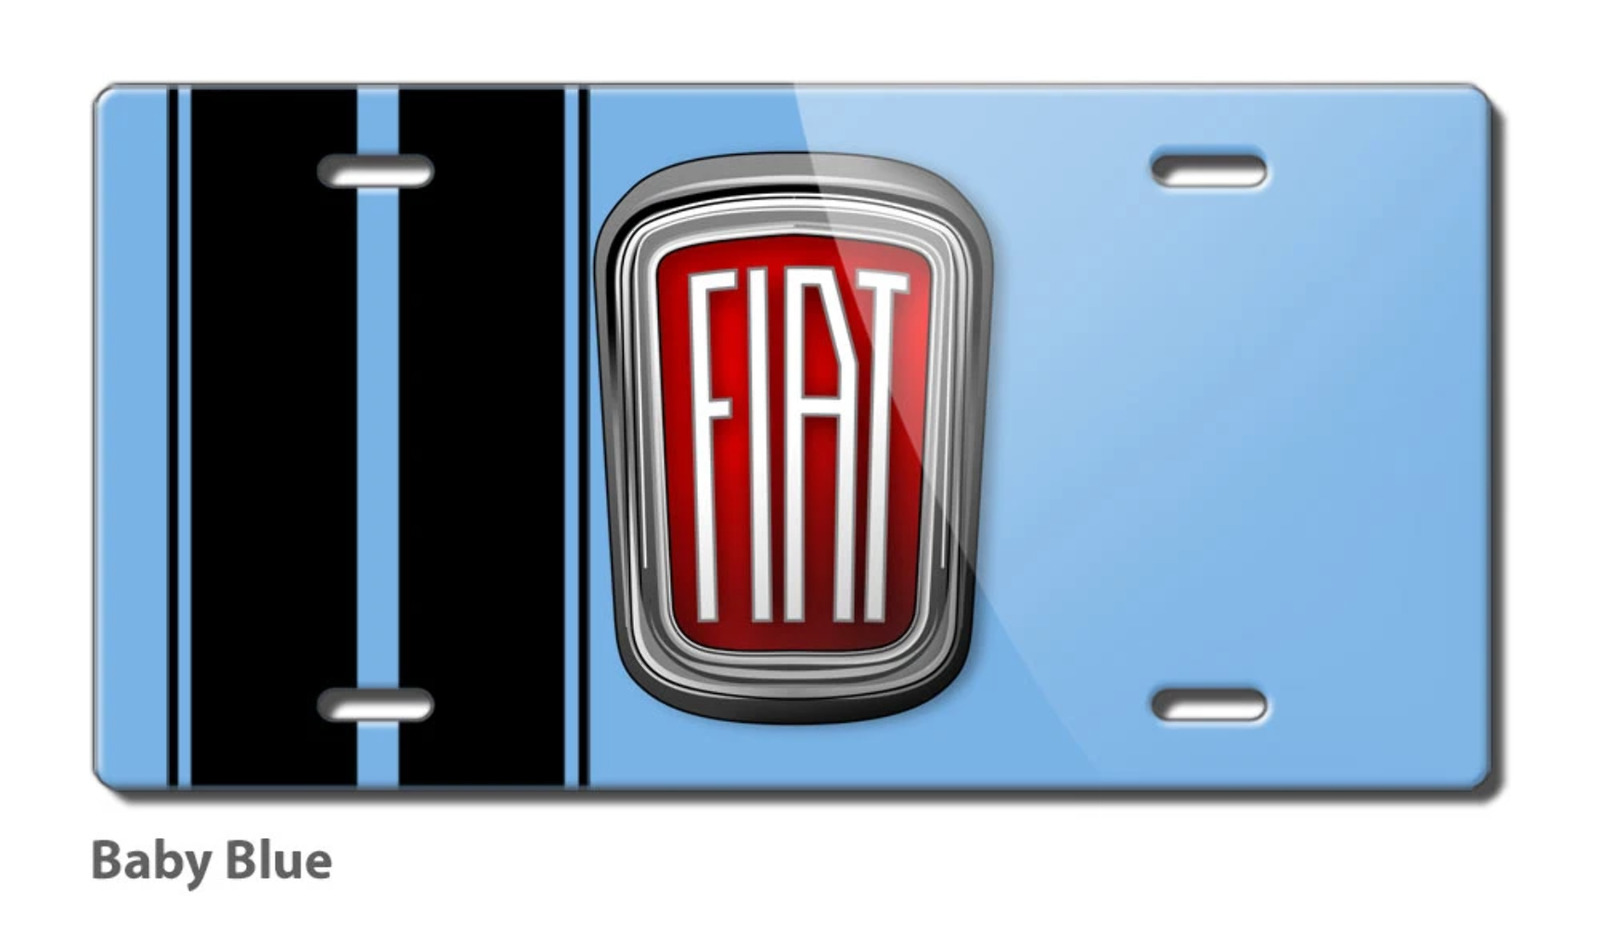 Fiat 1959 - 65 Emblem Novelty License Plate - Aluminum - 16 colors - Made in USA